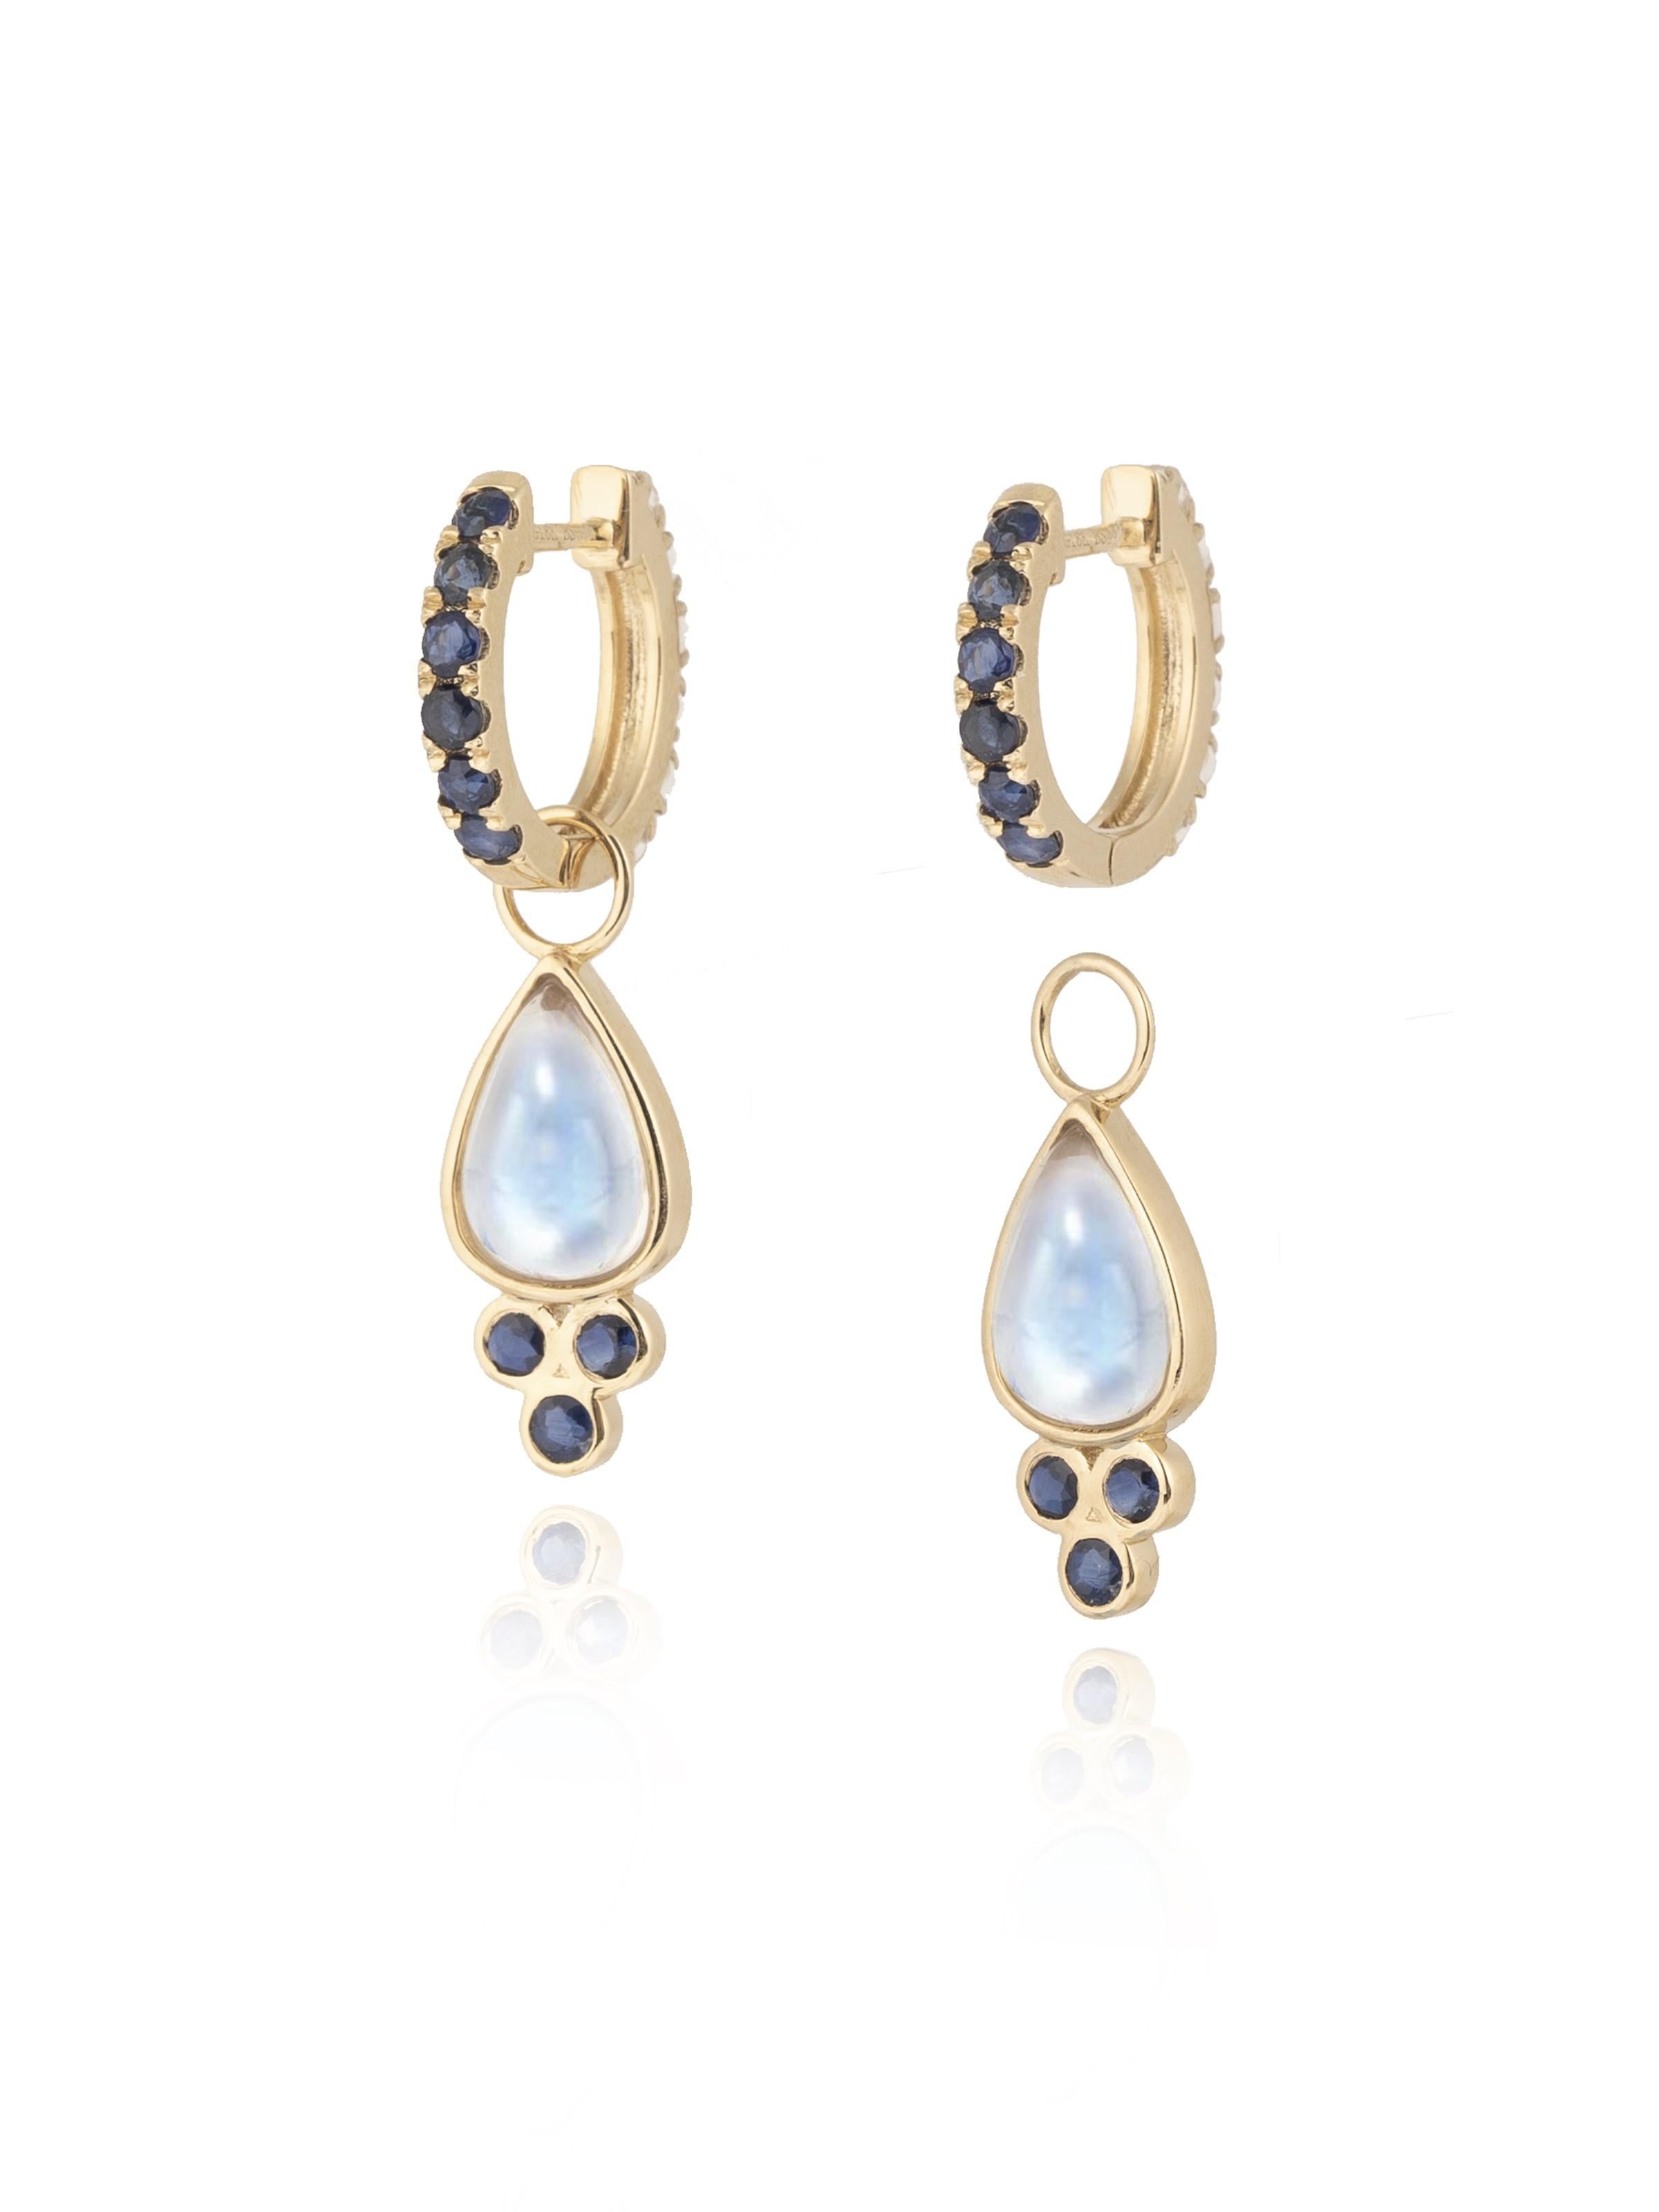 Discover Nina Zhou Sapphire and Moonstone Double-sided Hoop Earrings with Drop Enhancers. These exquisite earrings redefine elegance, featuring a stunning combination of sapphires and moonstone on both sides for a versatile look that's both playful